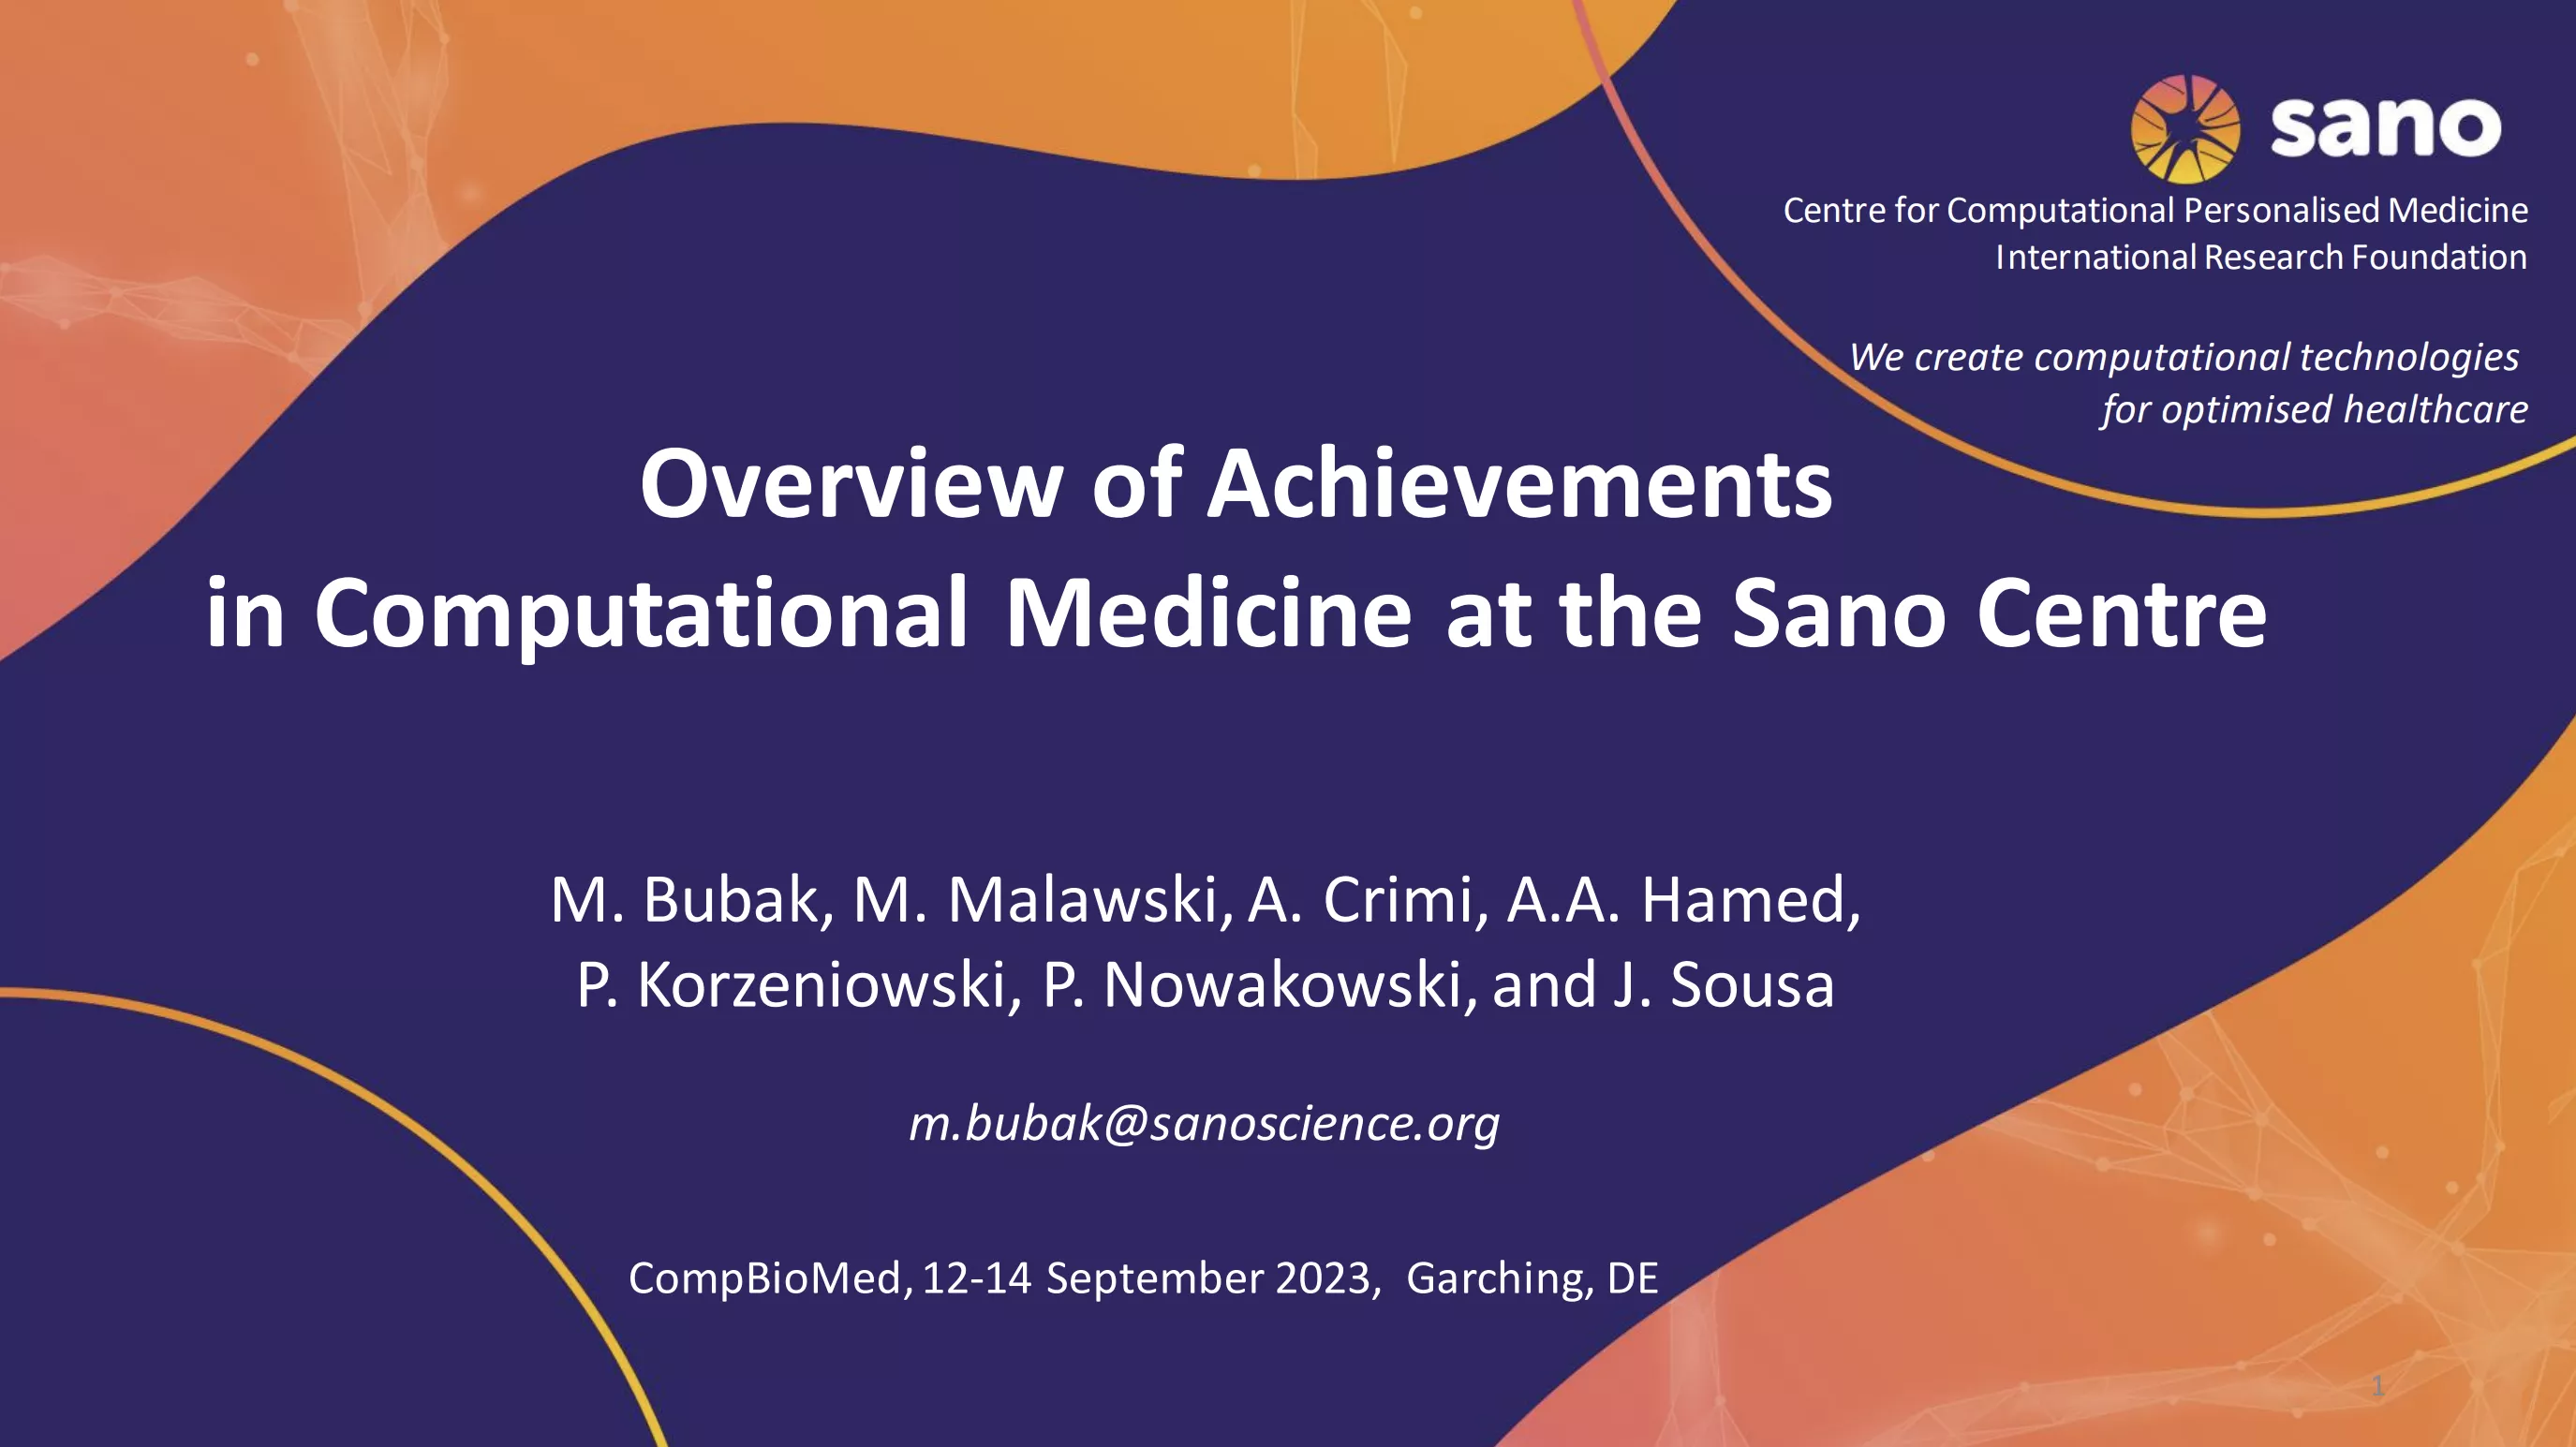 Overview of Achievements in Computational Medicine at the Sano Centre